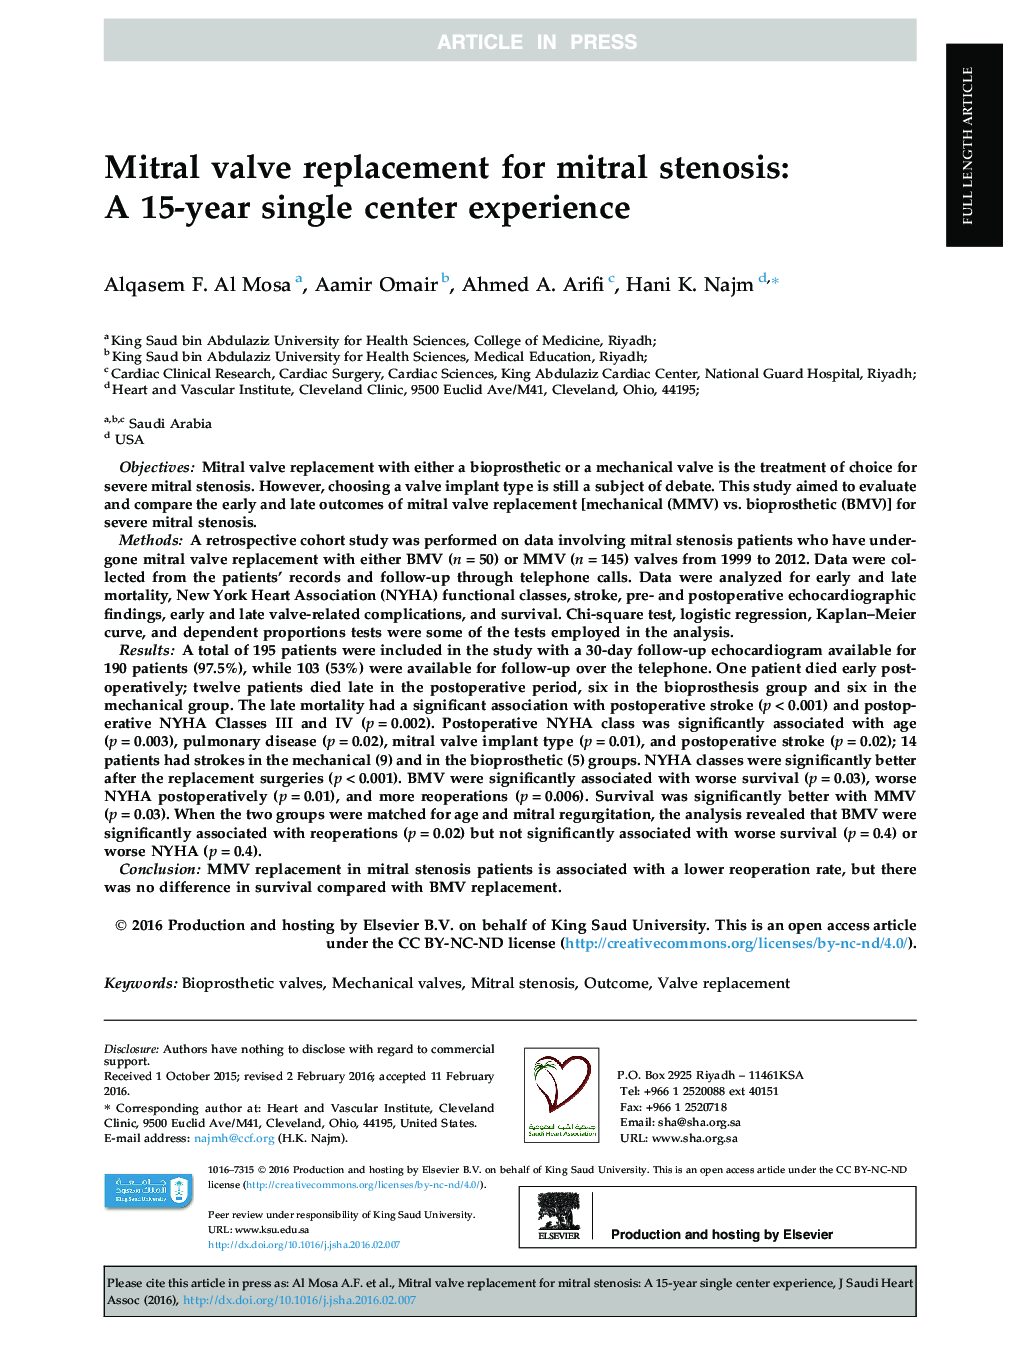 Mitral valve replacement for mitral stenosis: A 15-year single center experience